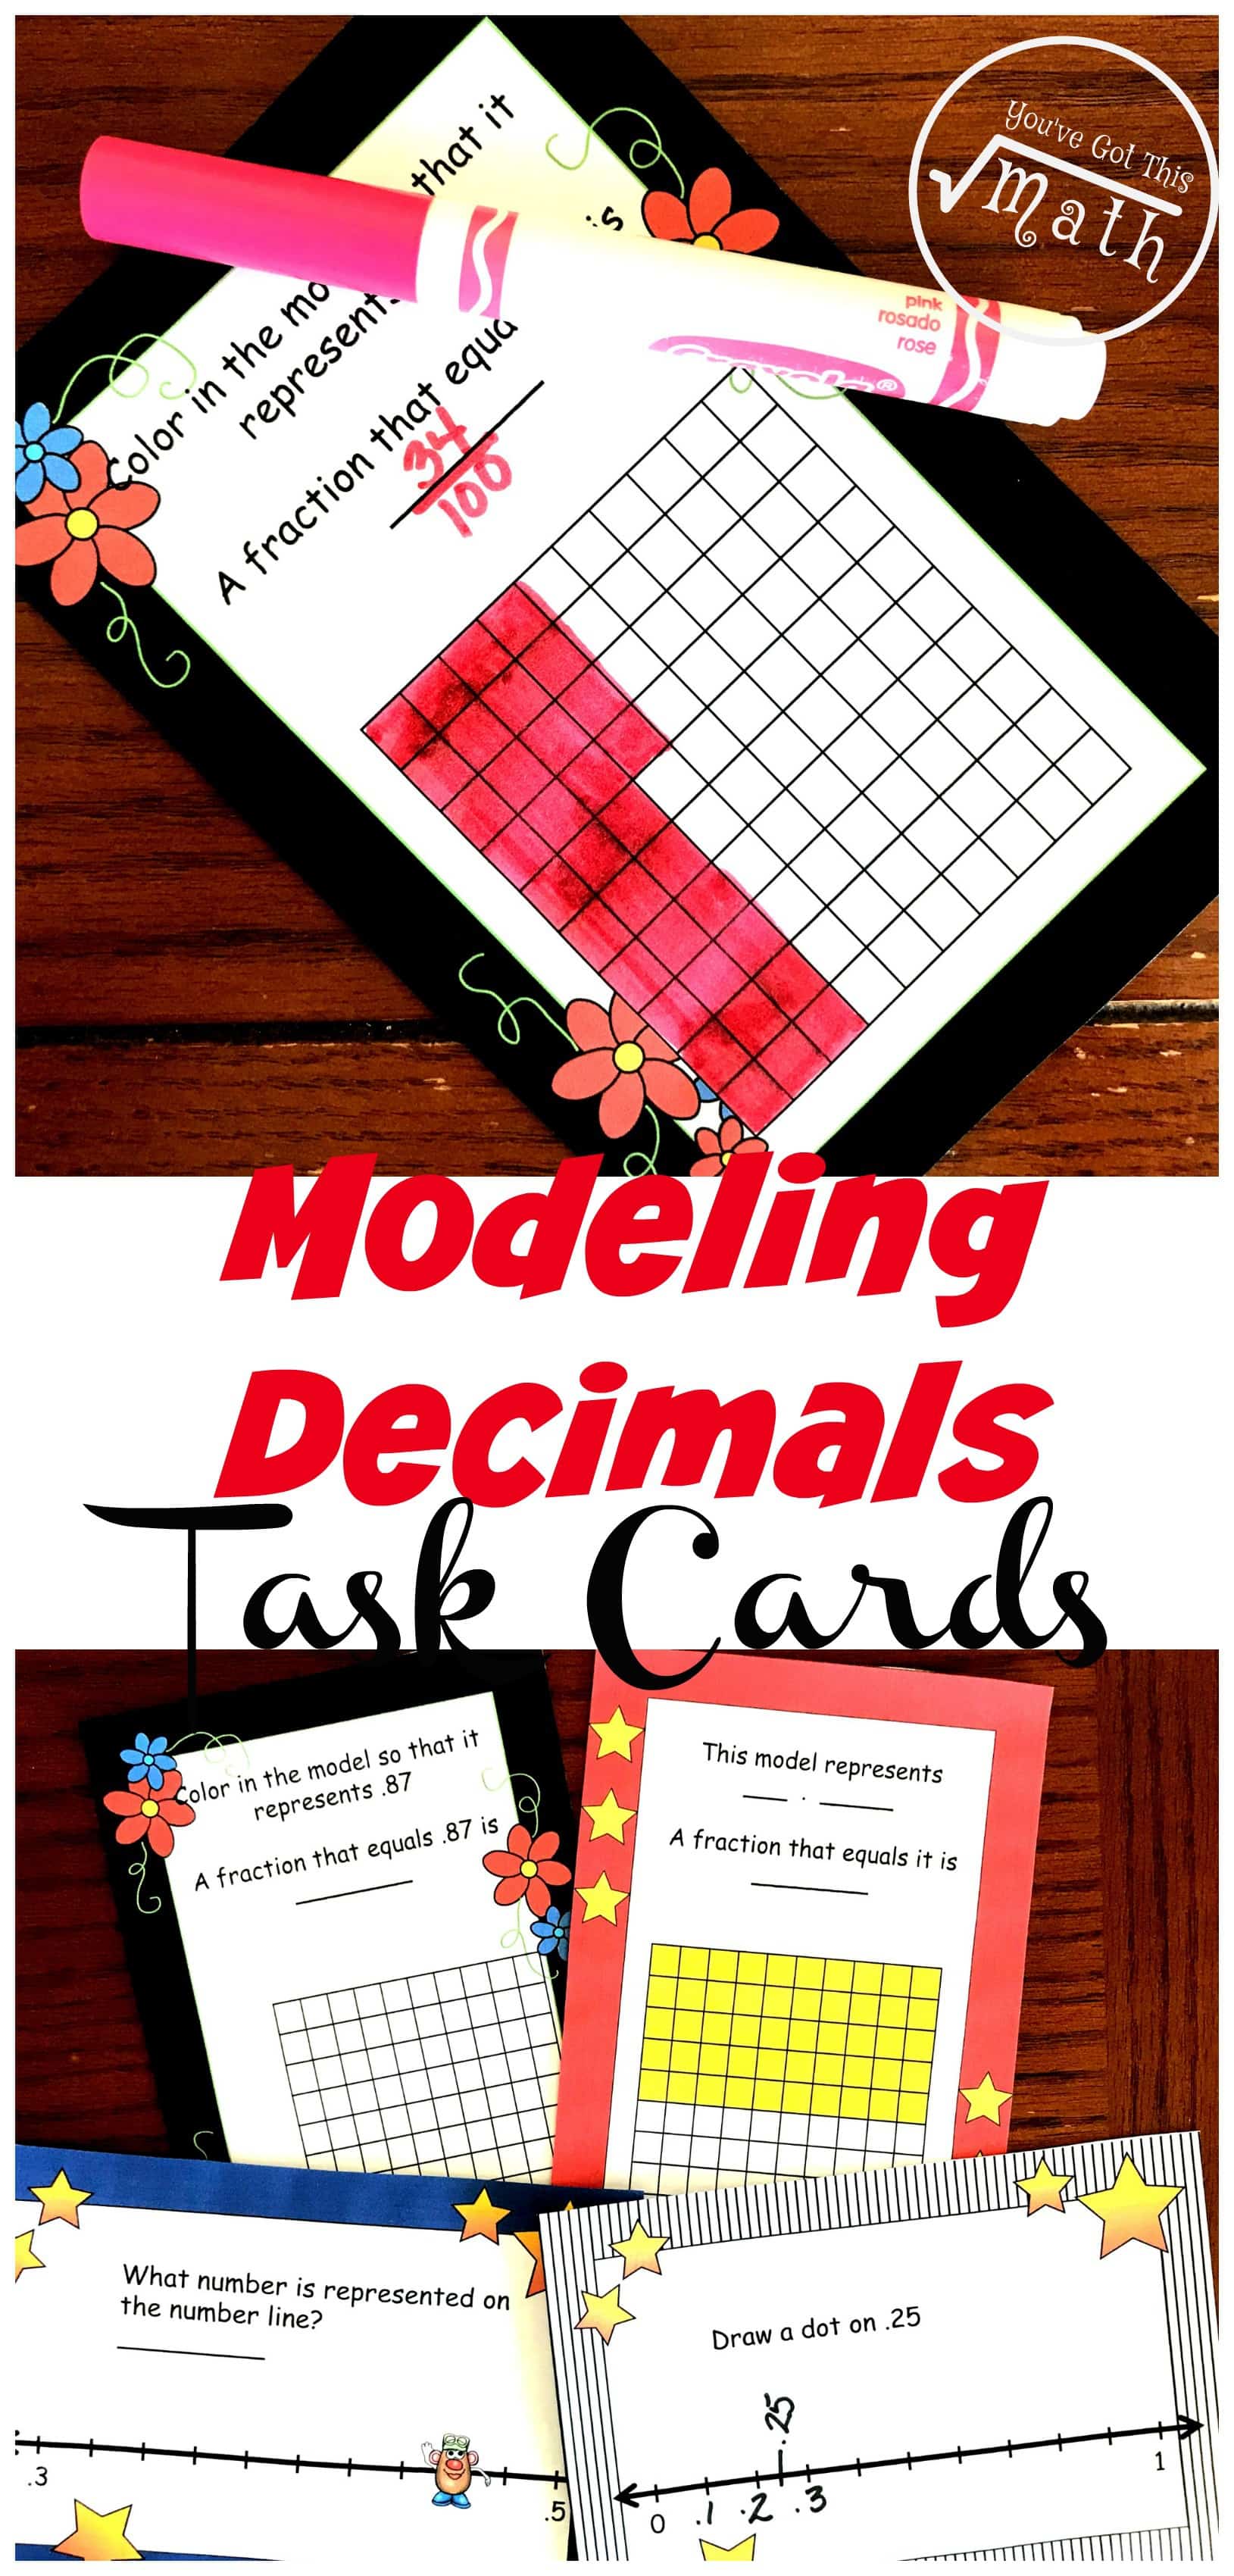 These task cards help children with modeling decimals. One set has children coloring a decimal grid to represent a decimal, while another has children figuring out the decimal represented on a decimal grid. The other two sets have children modeling decimals on number lines.